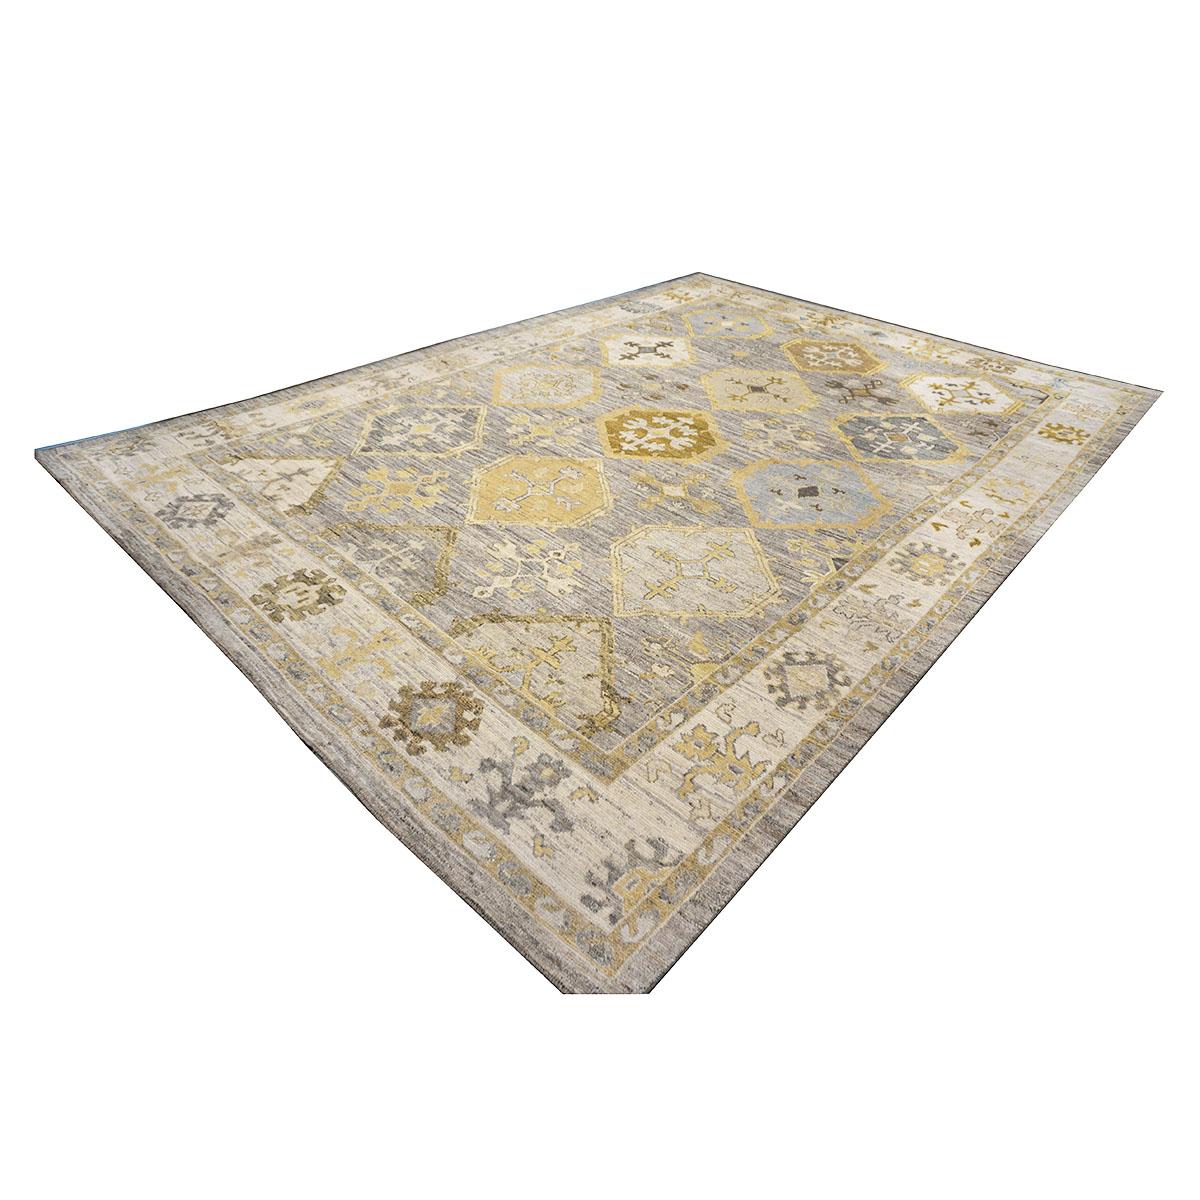 21st Century Turkish Oushak 11x15 Grey, Ivory, & Yellow Olive Handmade Area Rug In Excellent Condition For Sale In Houston, TX